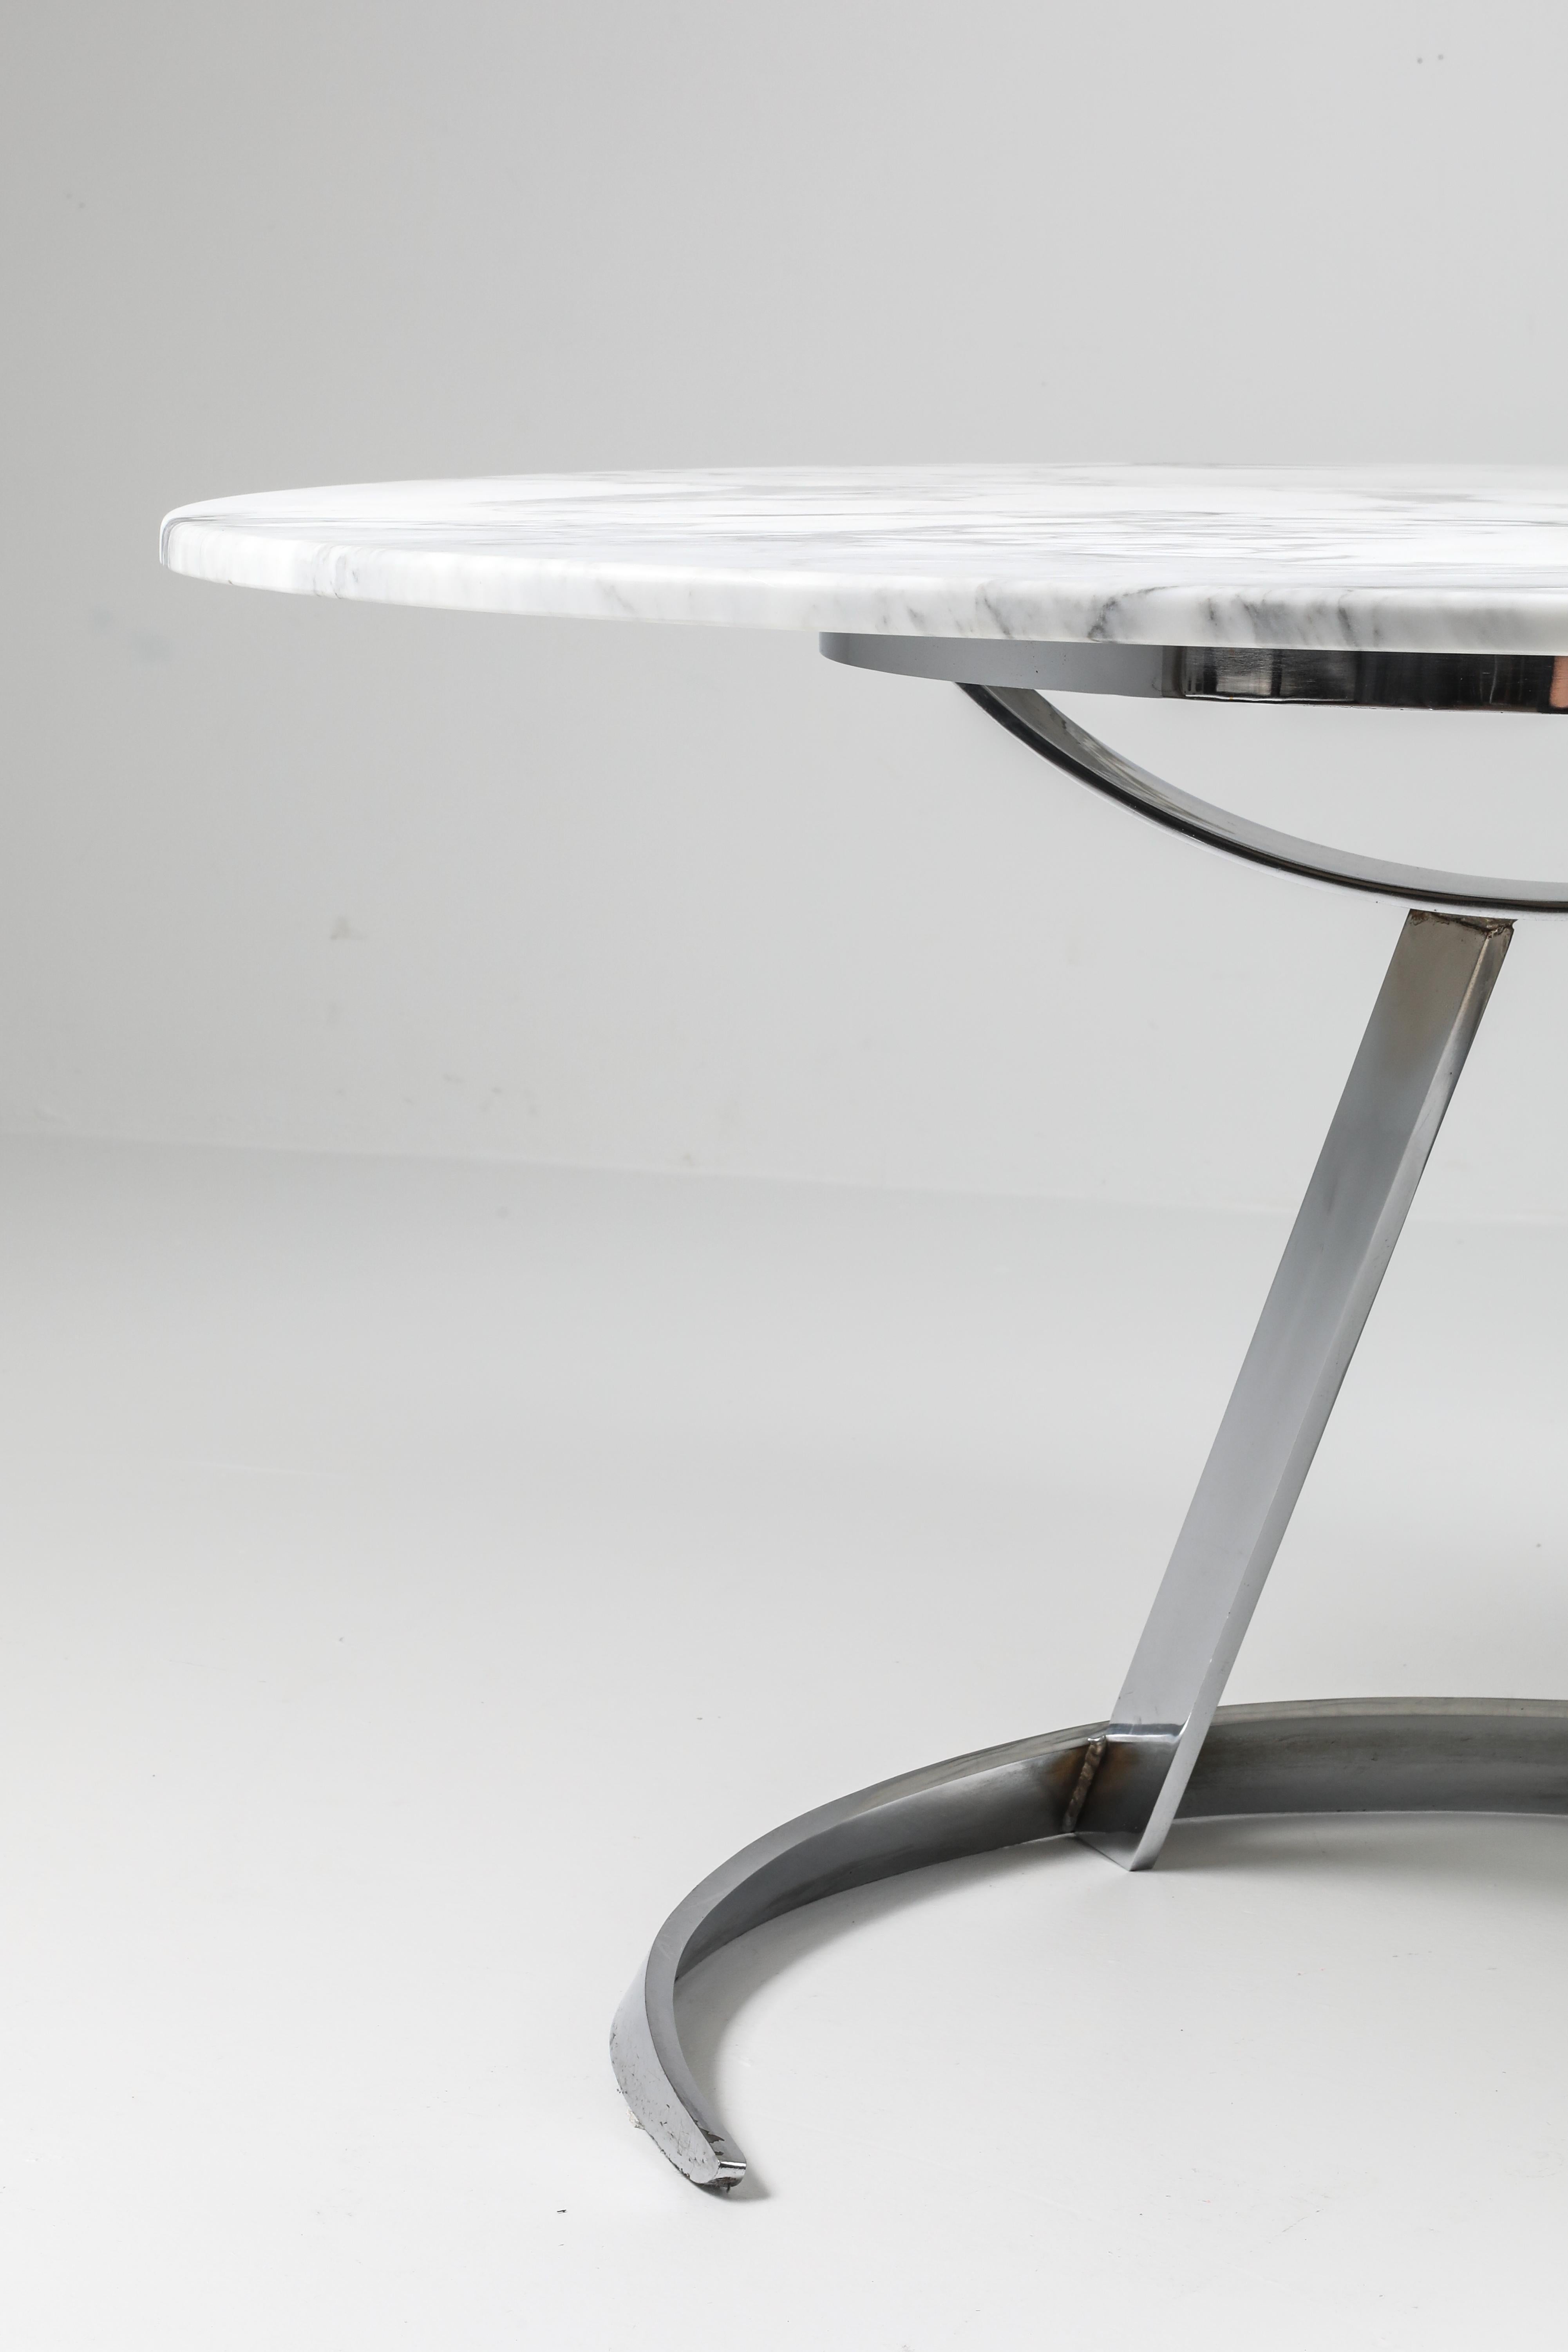 Wool Marble and Chrome Boris Tabaccof Dining Room Table For Sale